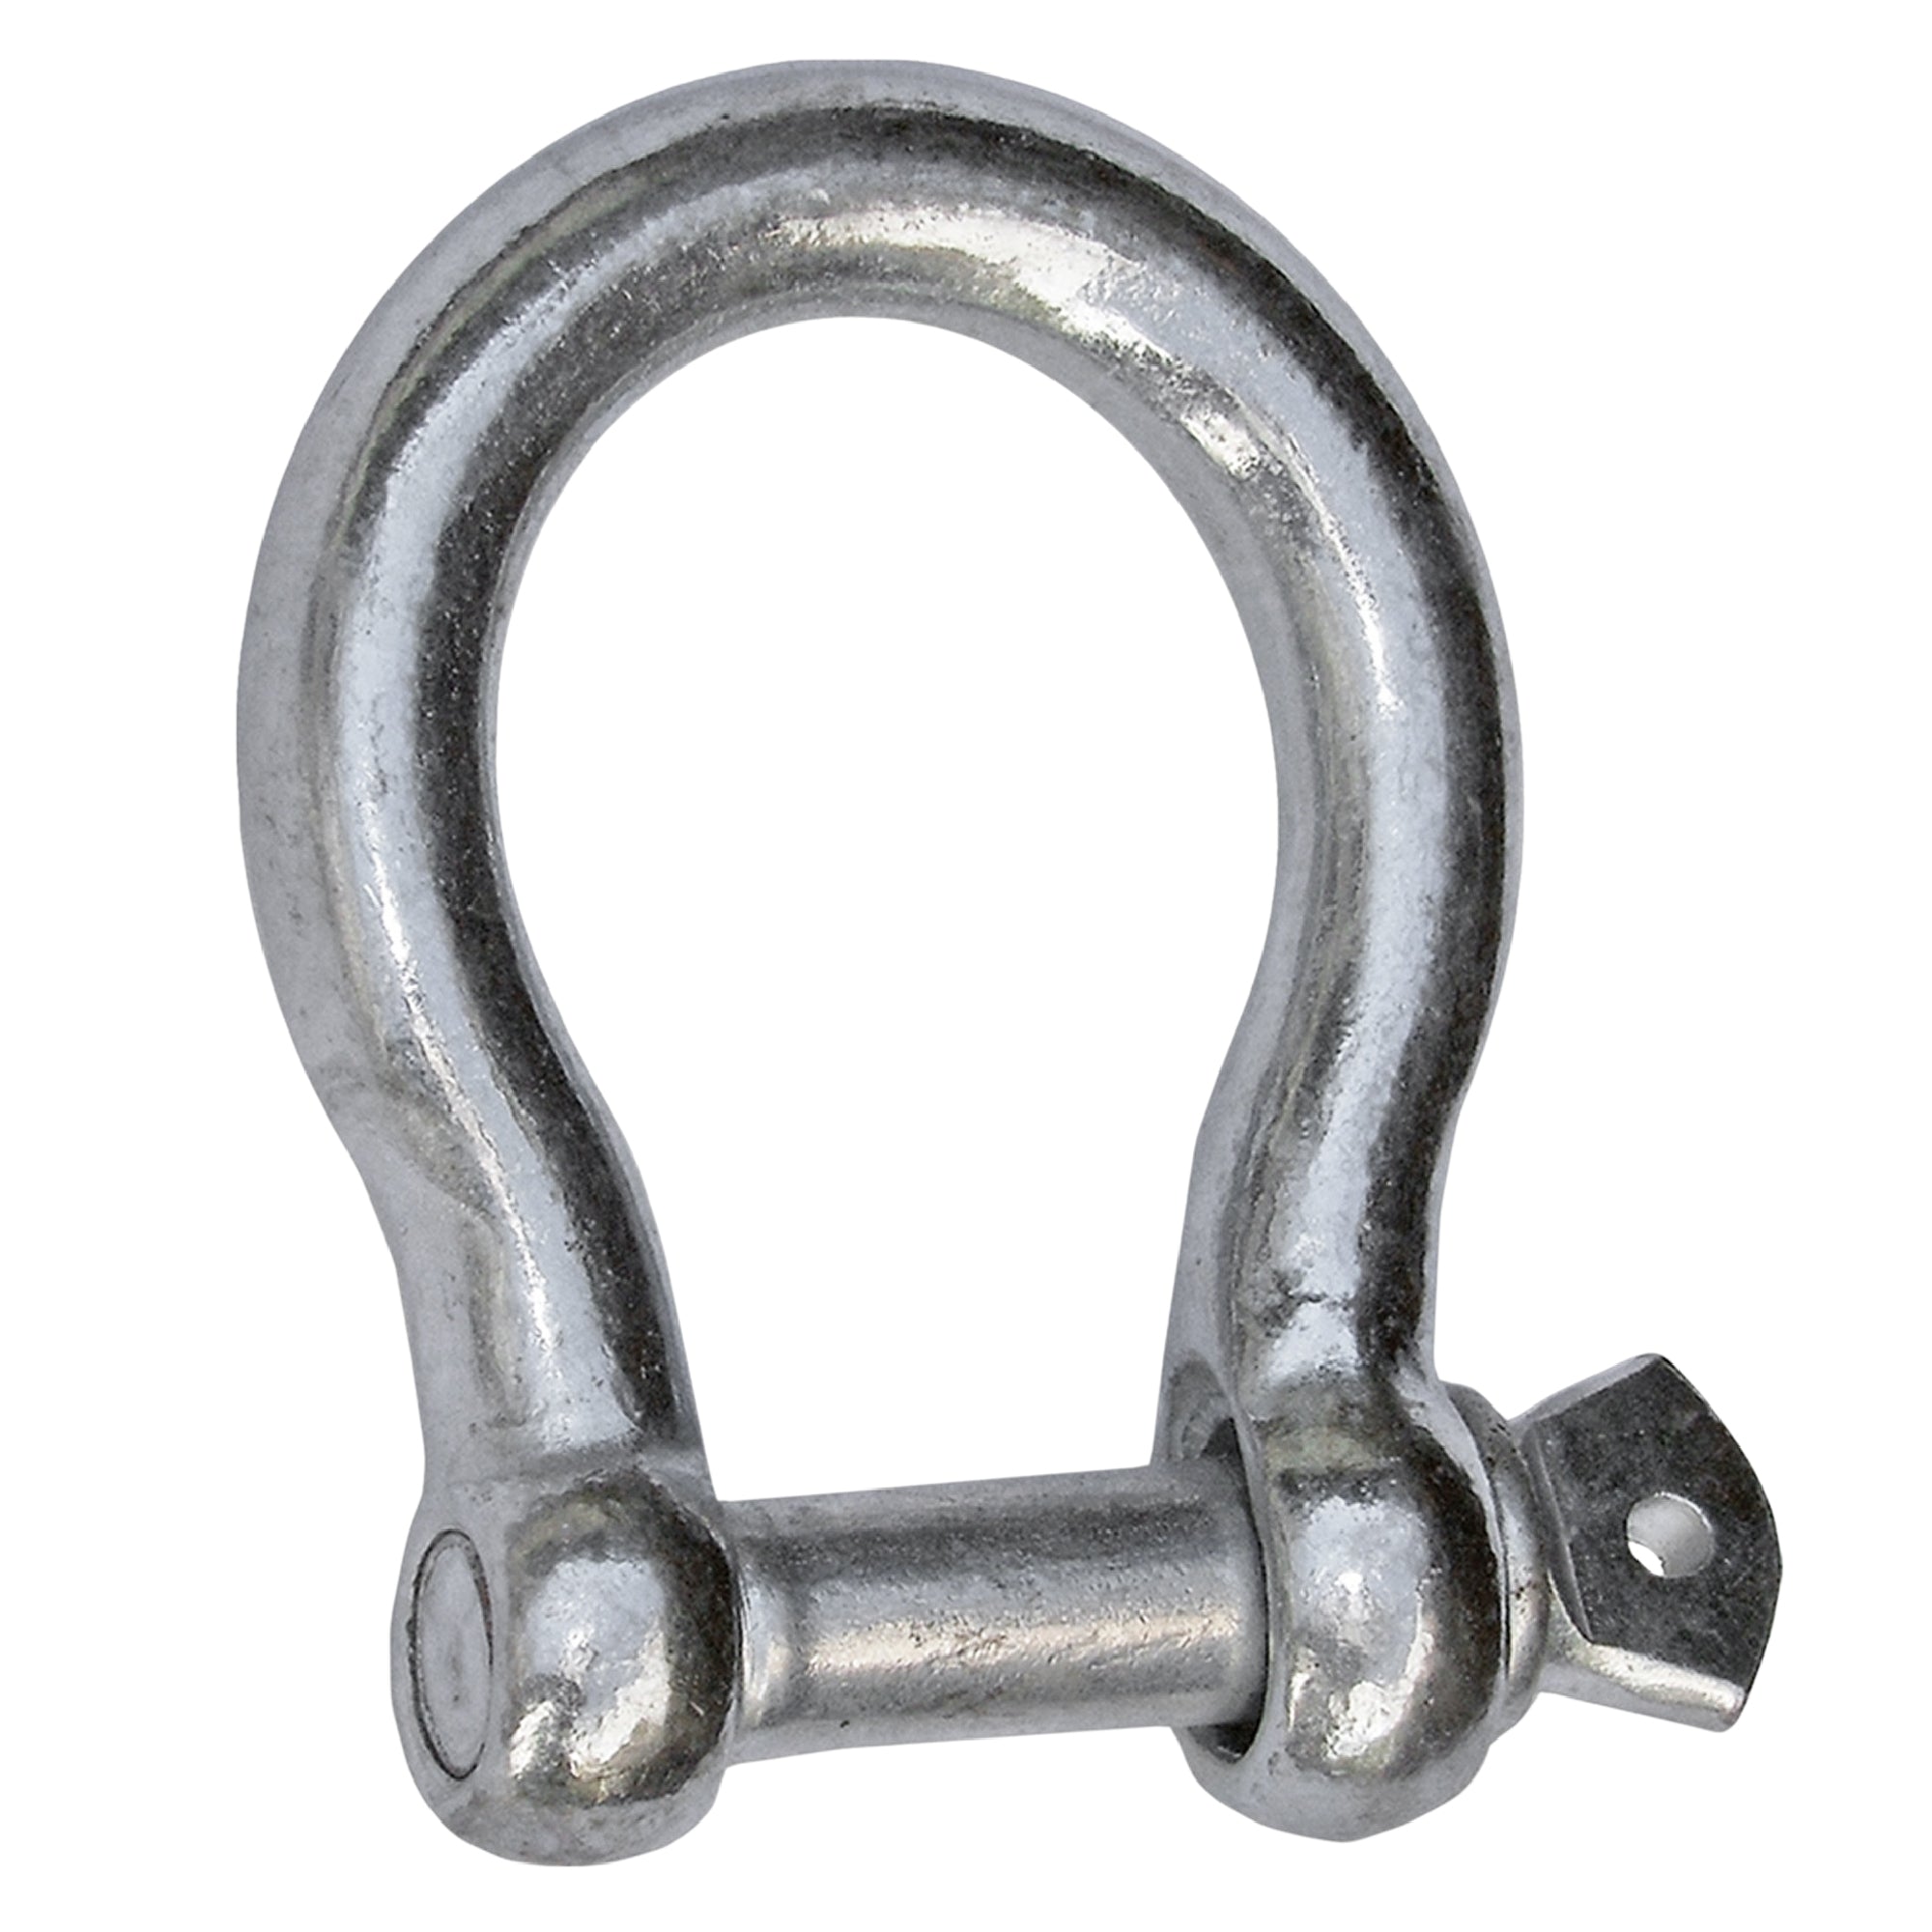 Pin Bow Shackles, 1/4" Galvanized 6-Pack - FO432-M6